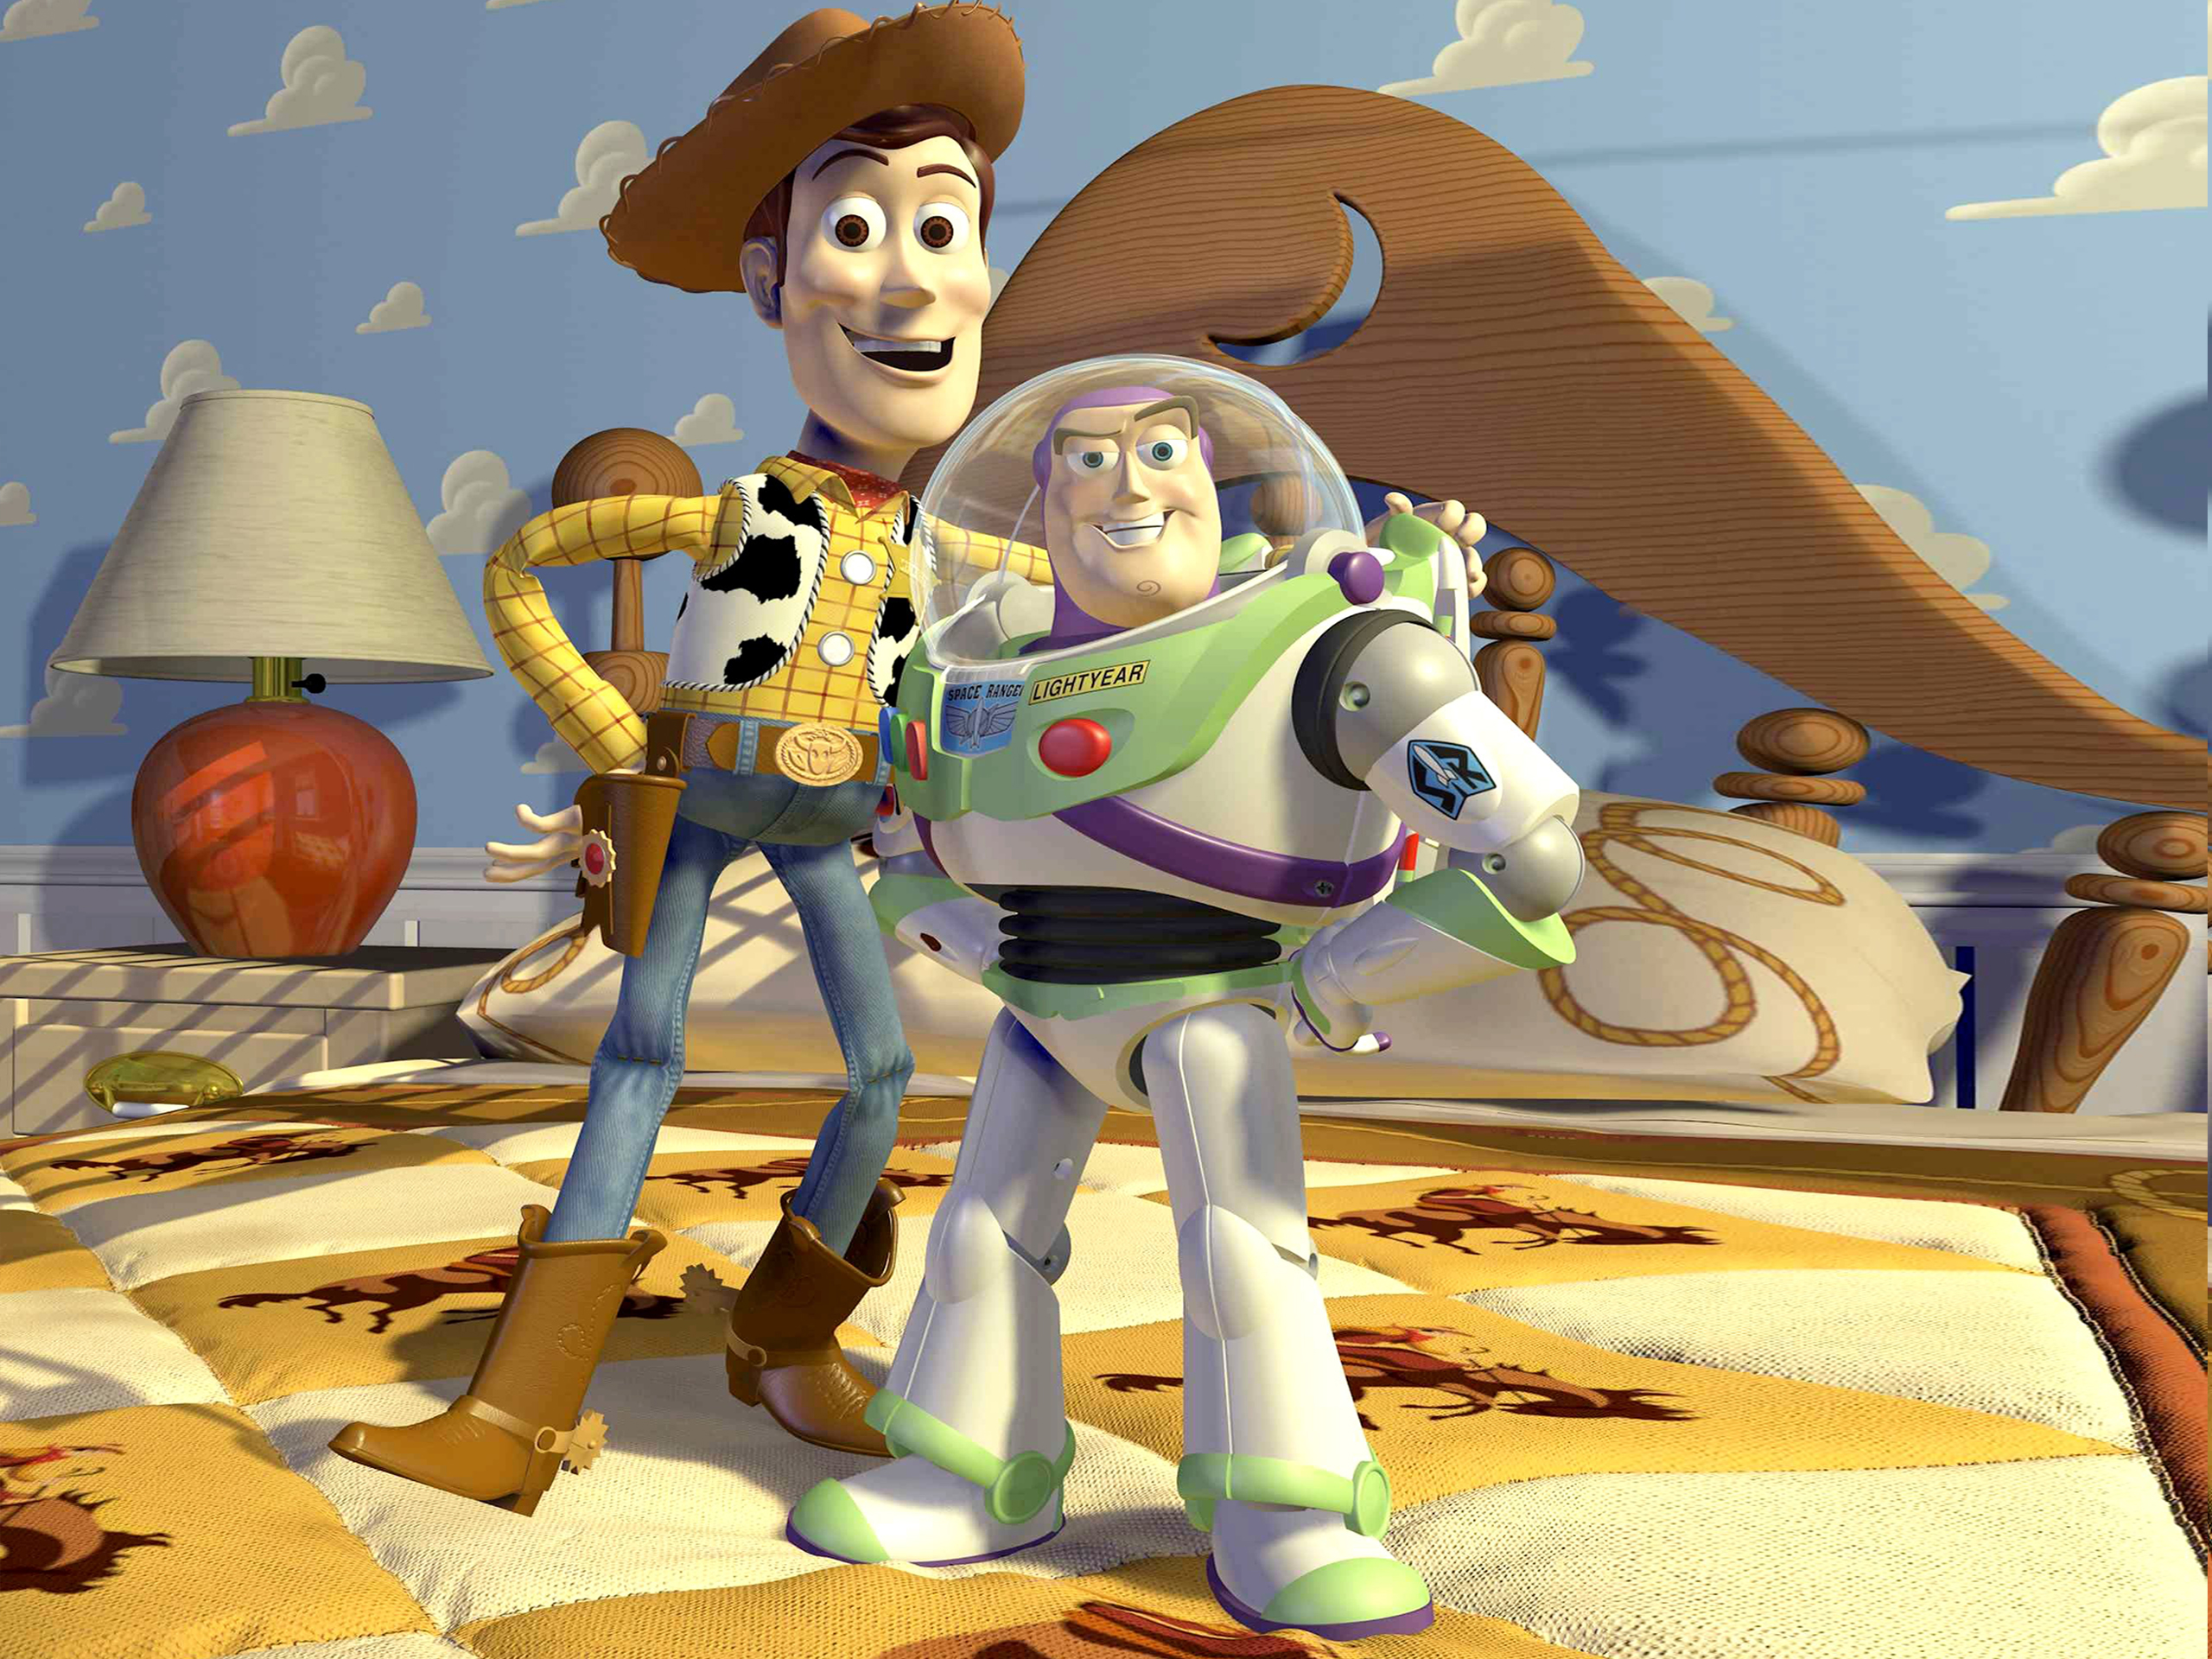 Toy Story 3 Free Desktop Wallpapers for HD, Widescreen and Mobile